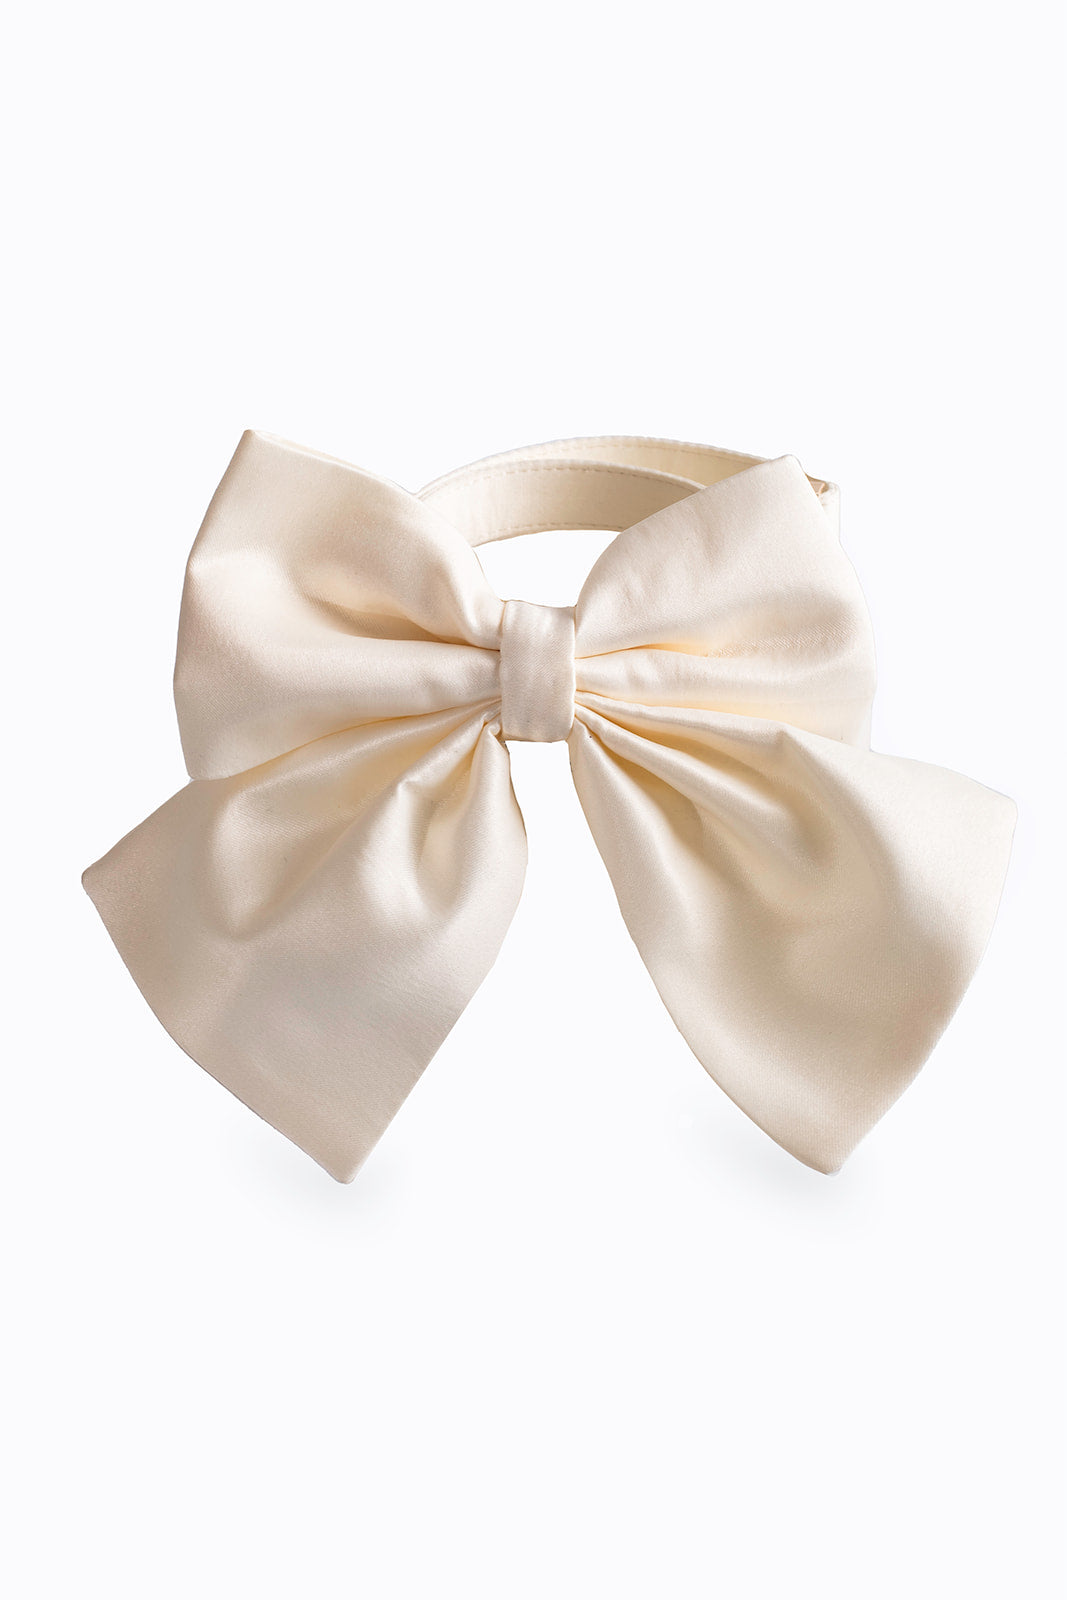 *IN STOCK NOW* The Bestie Pet Bow in Ivory